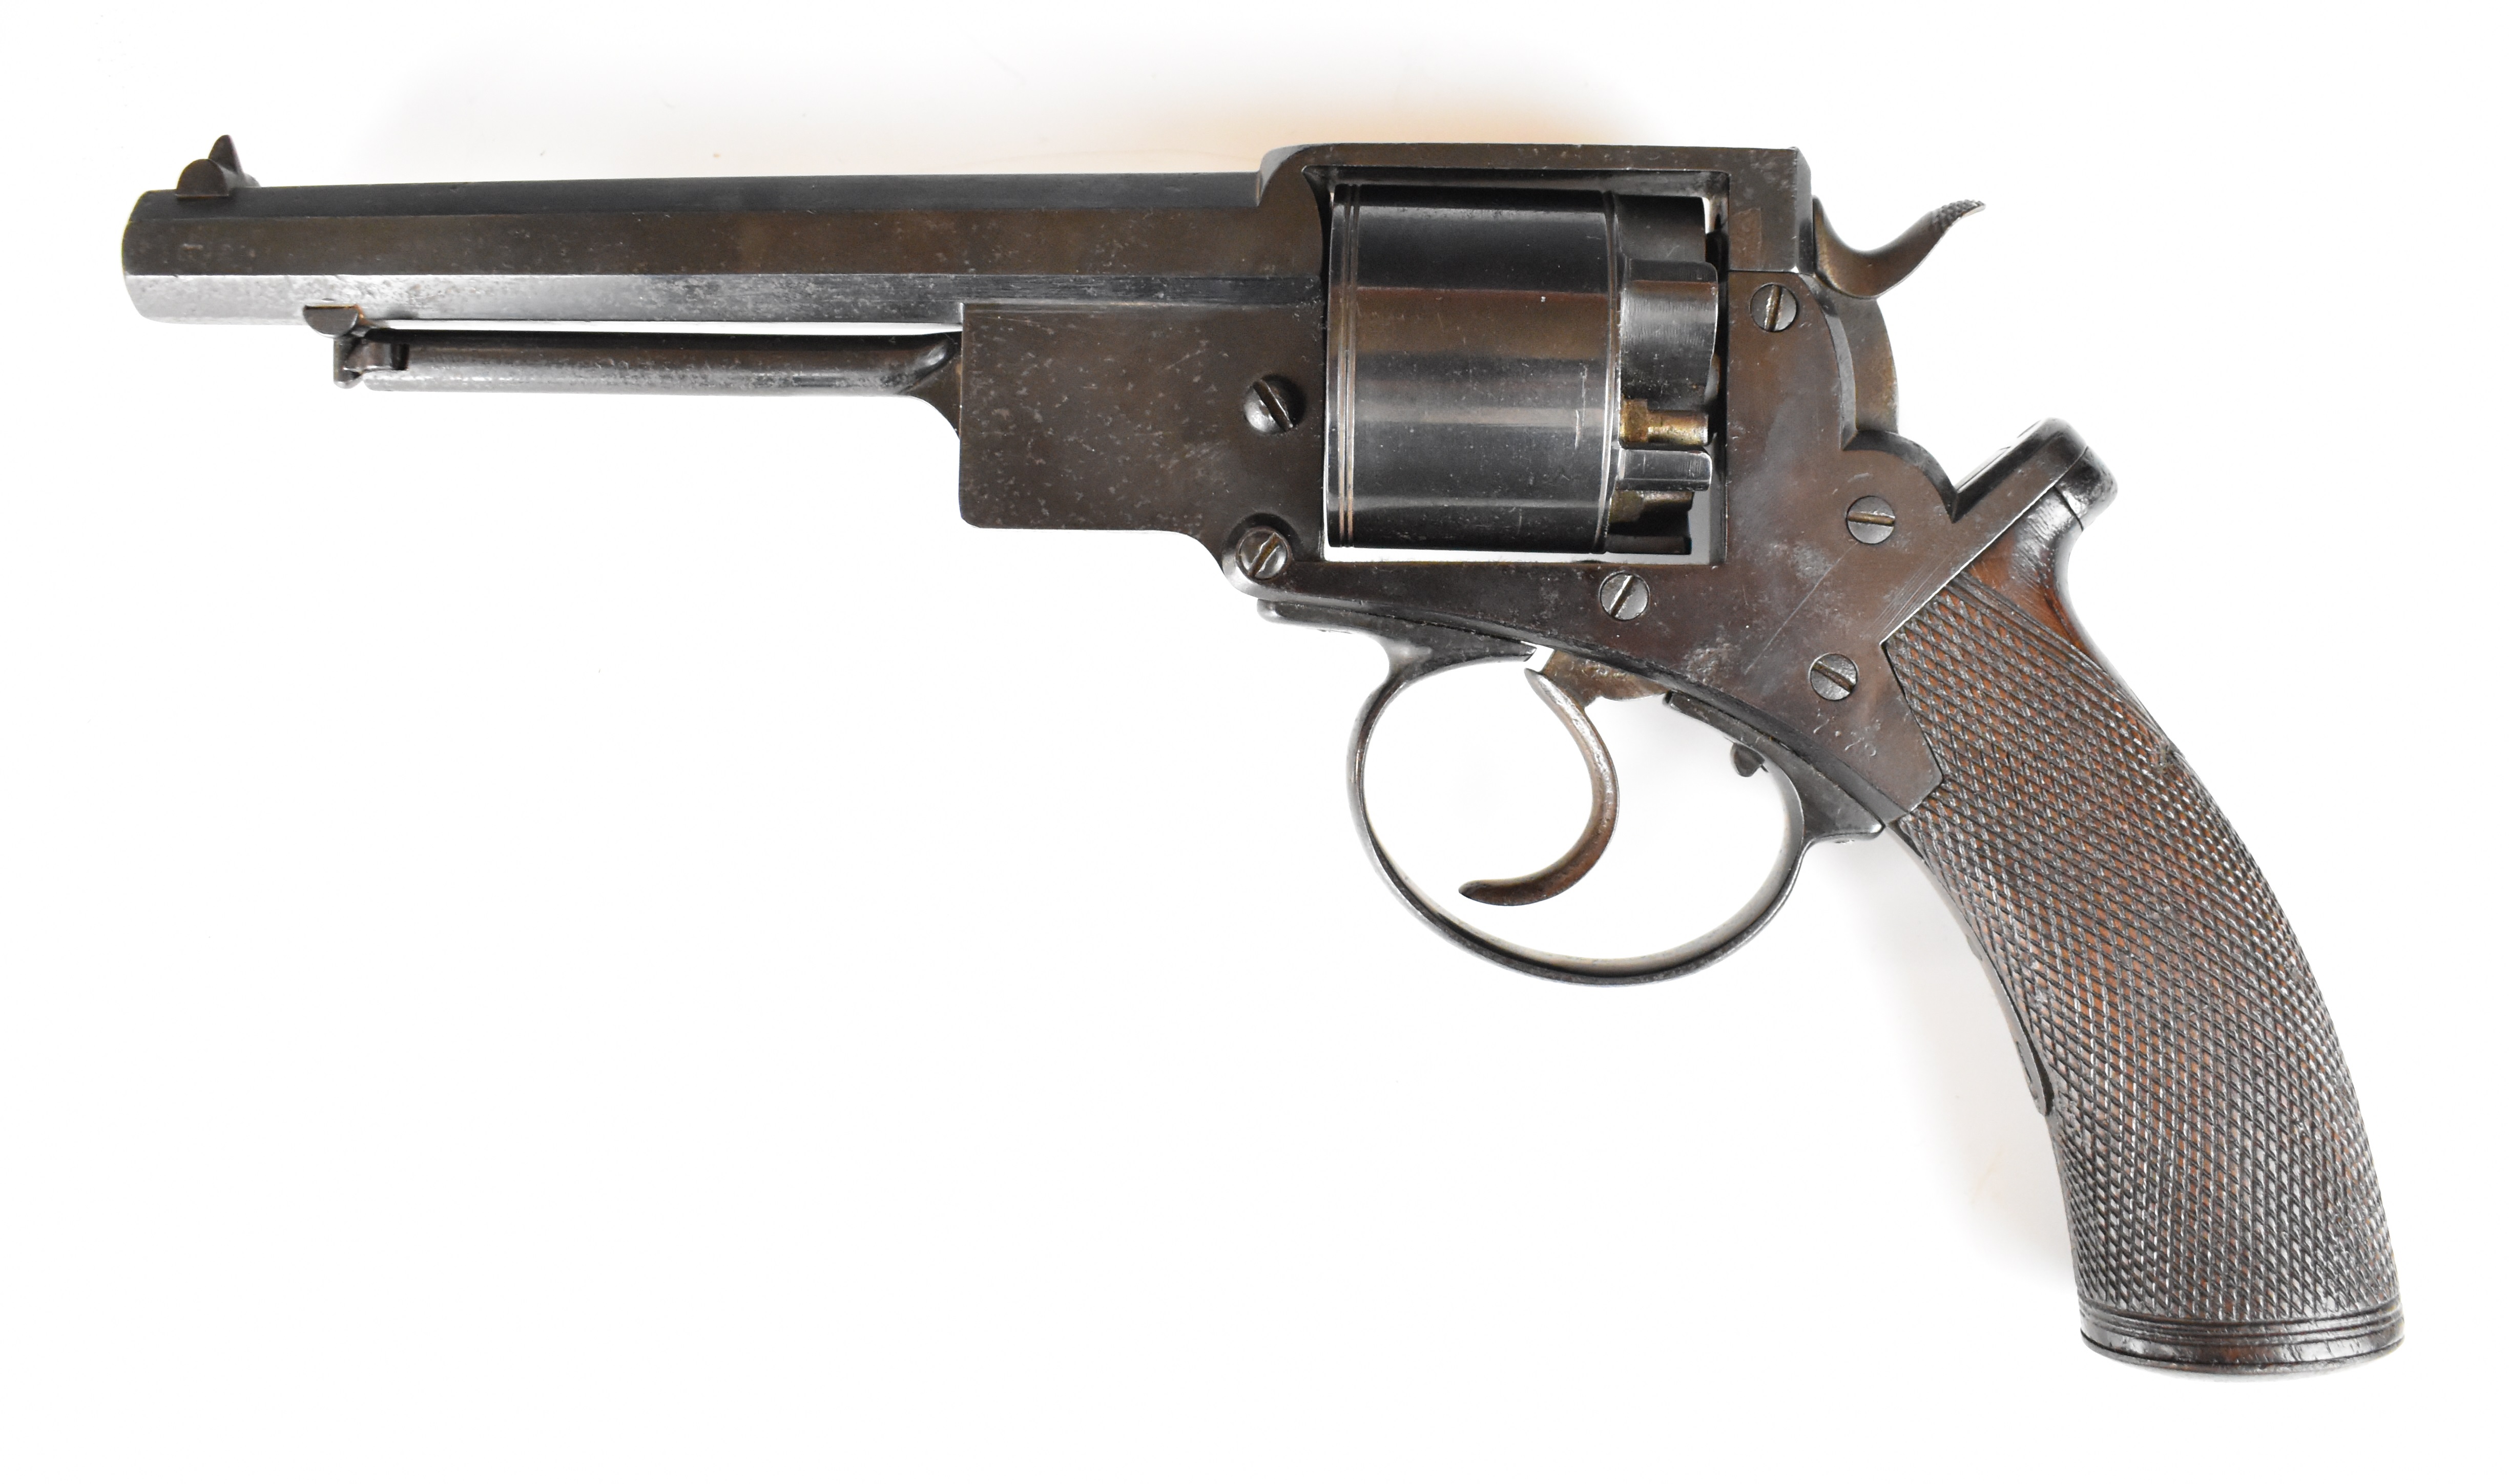 Adam's Patent 50 bore six-shot double-action revolver with chequered grip, line engraved cylinder, - Image 17 of 30